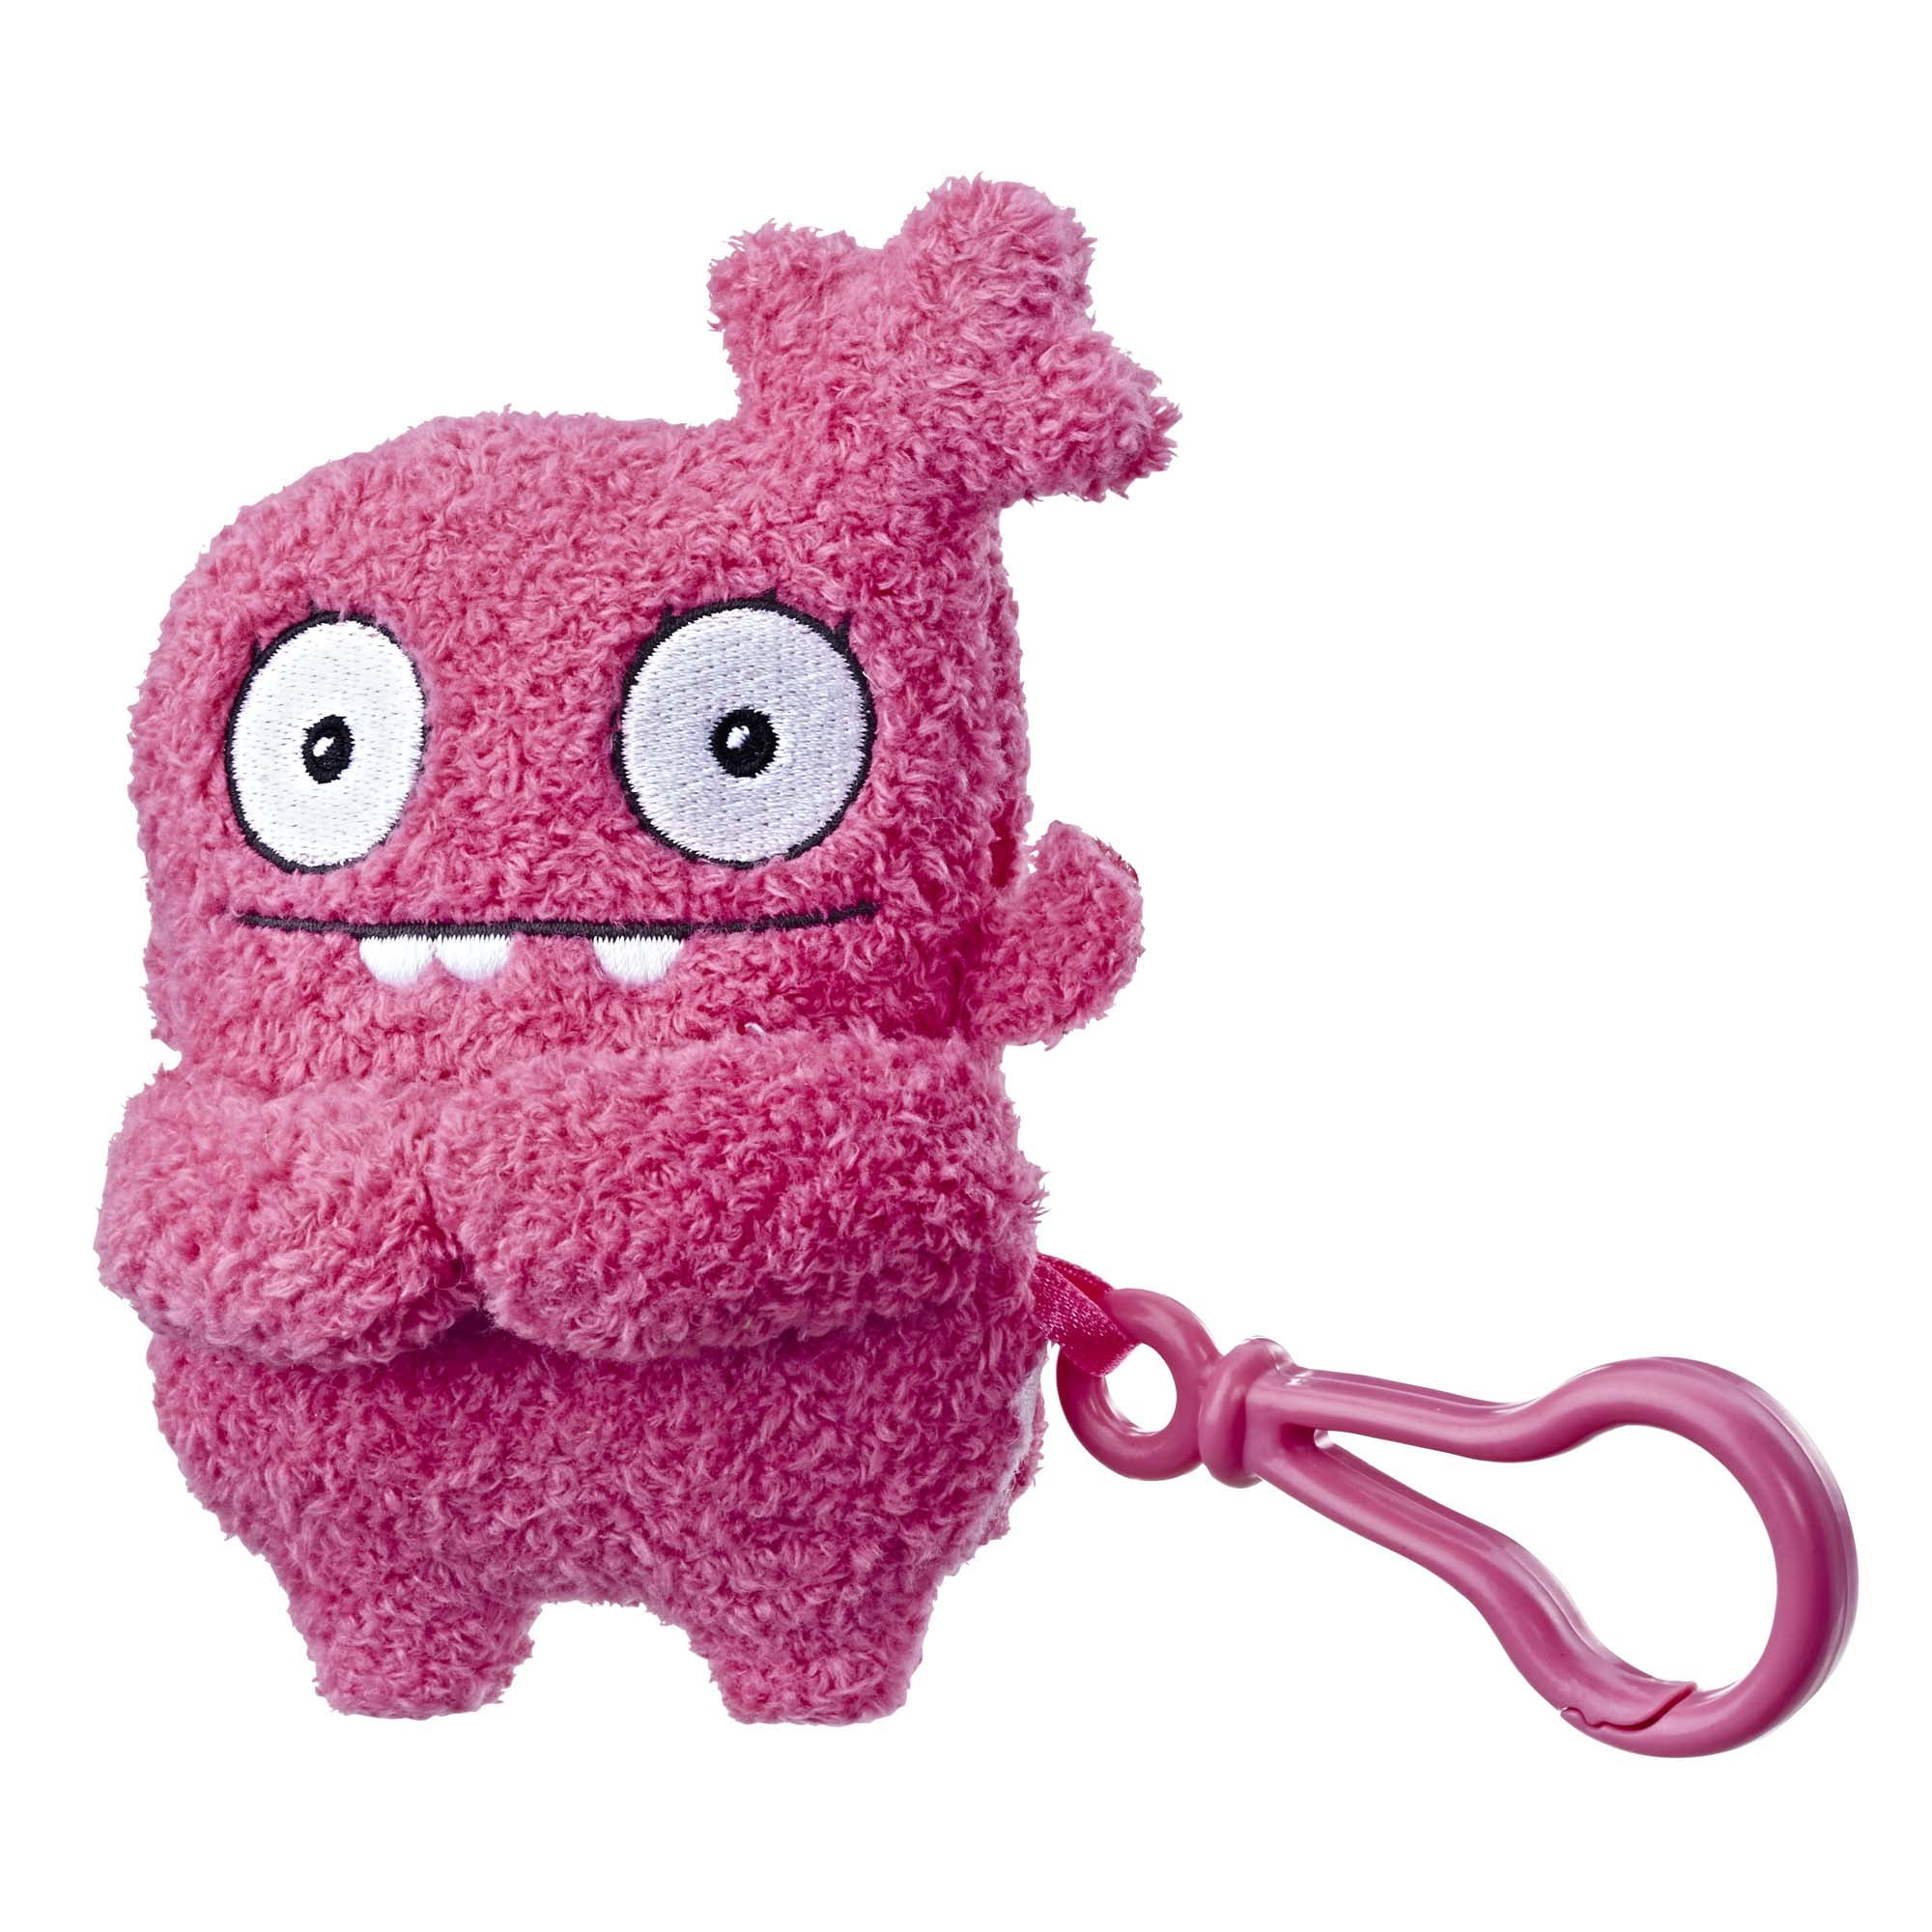 Uglydolls Feature Sounds Moxy Stuffed Plush Toy That Talks 11 Inches Tall for sale online 